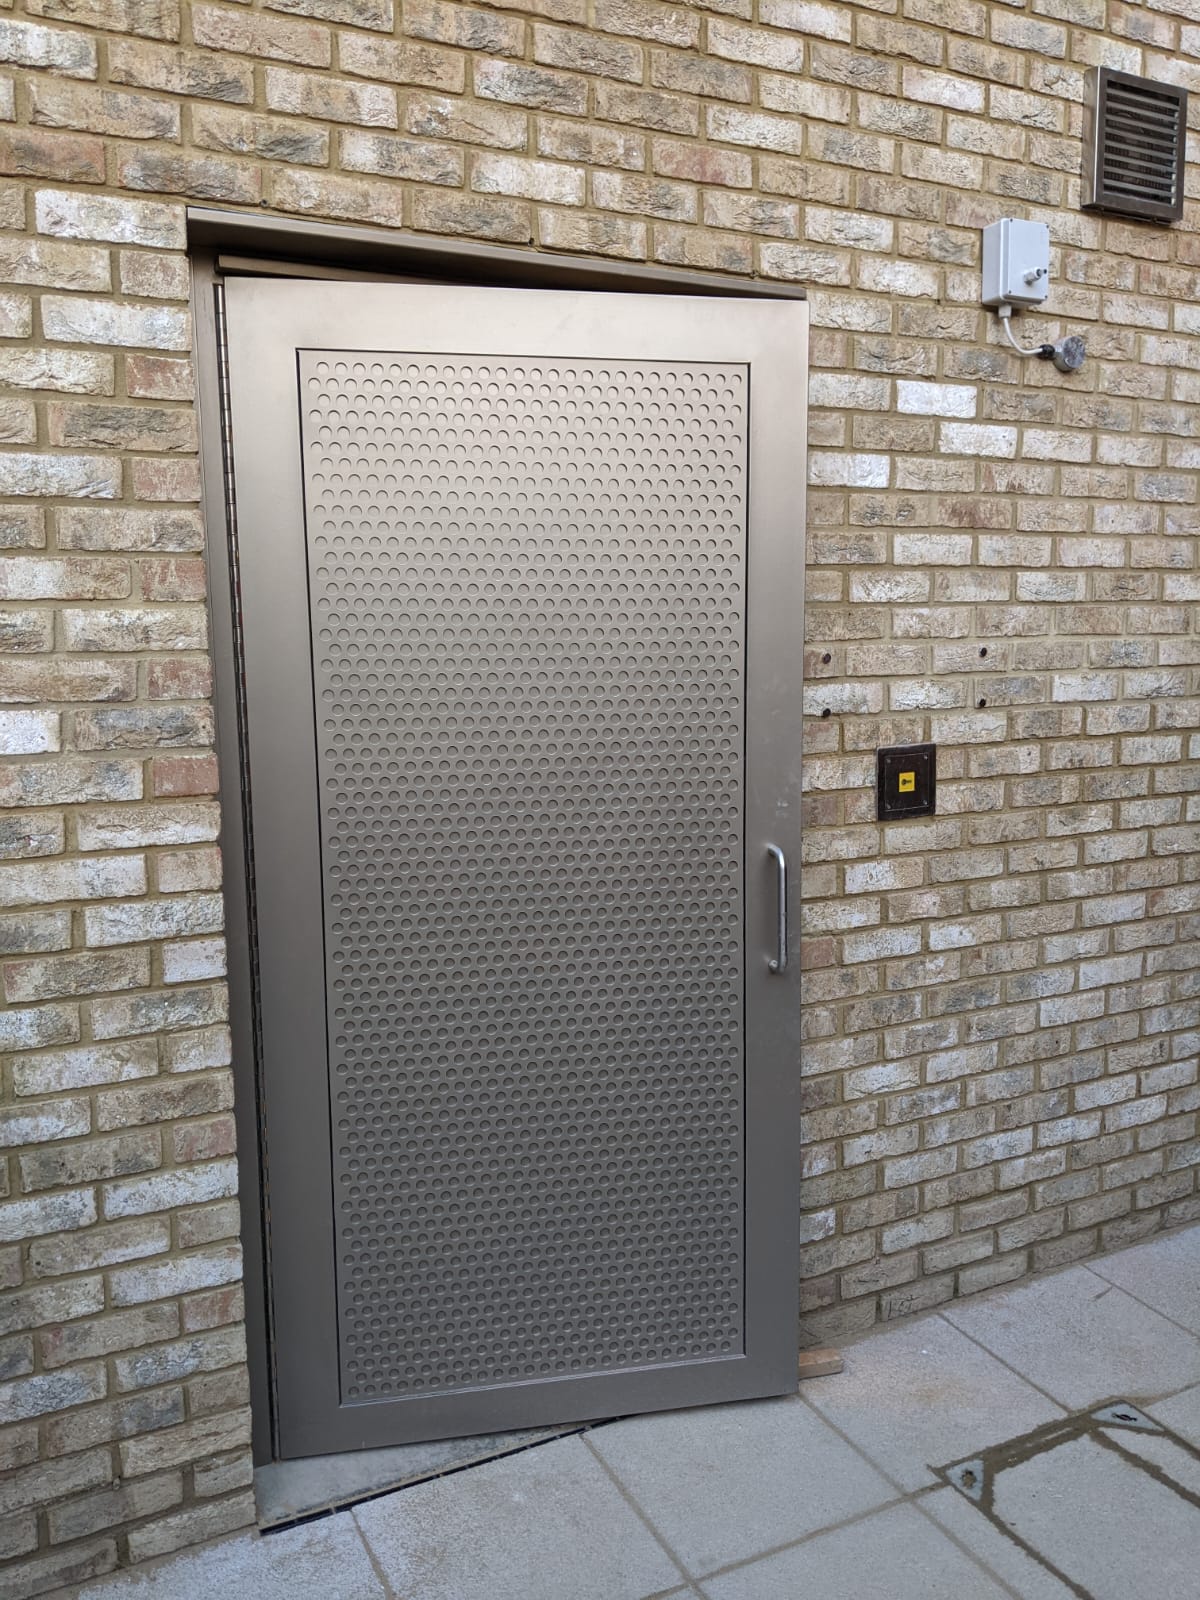 Industrial steel door incorporating perforated design achieving LPS1175 SR2 rating and Secured by Design accreditation.